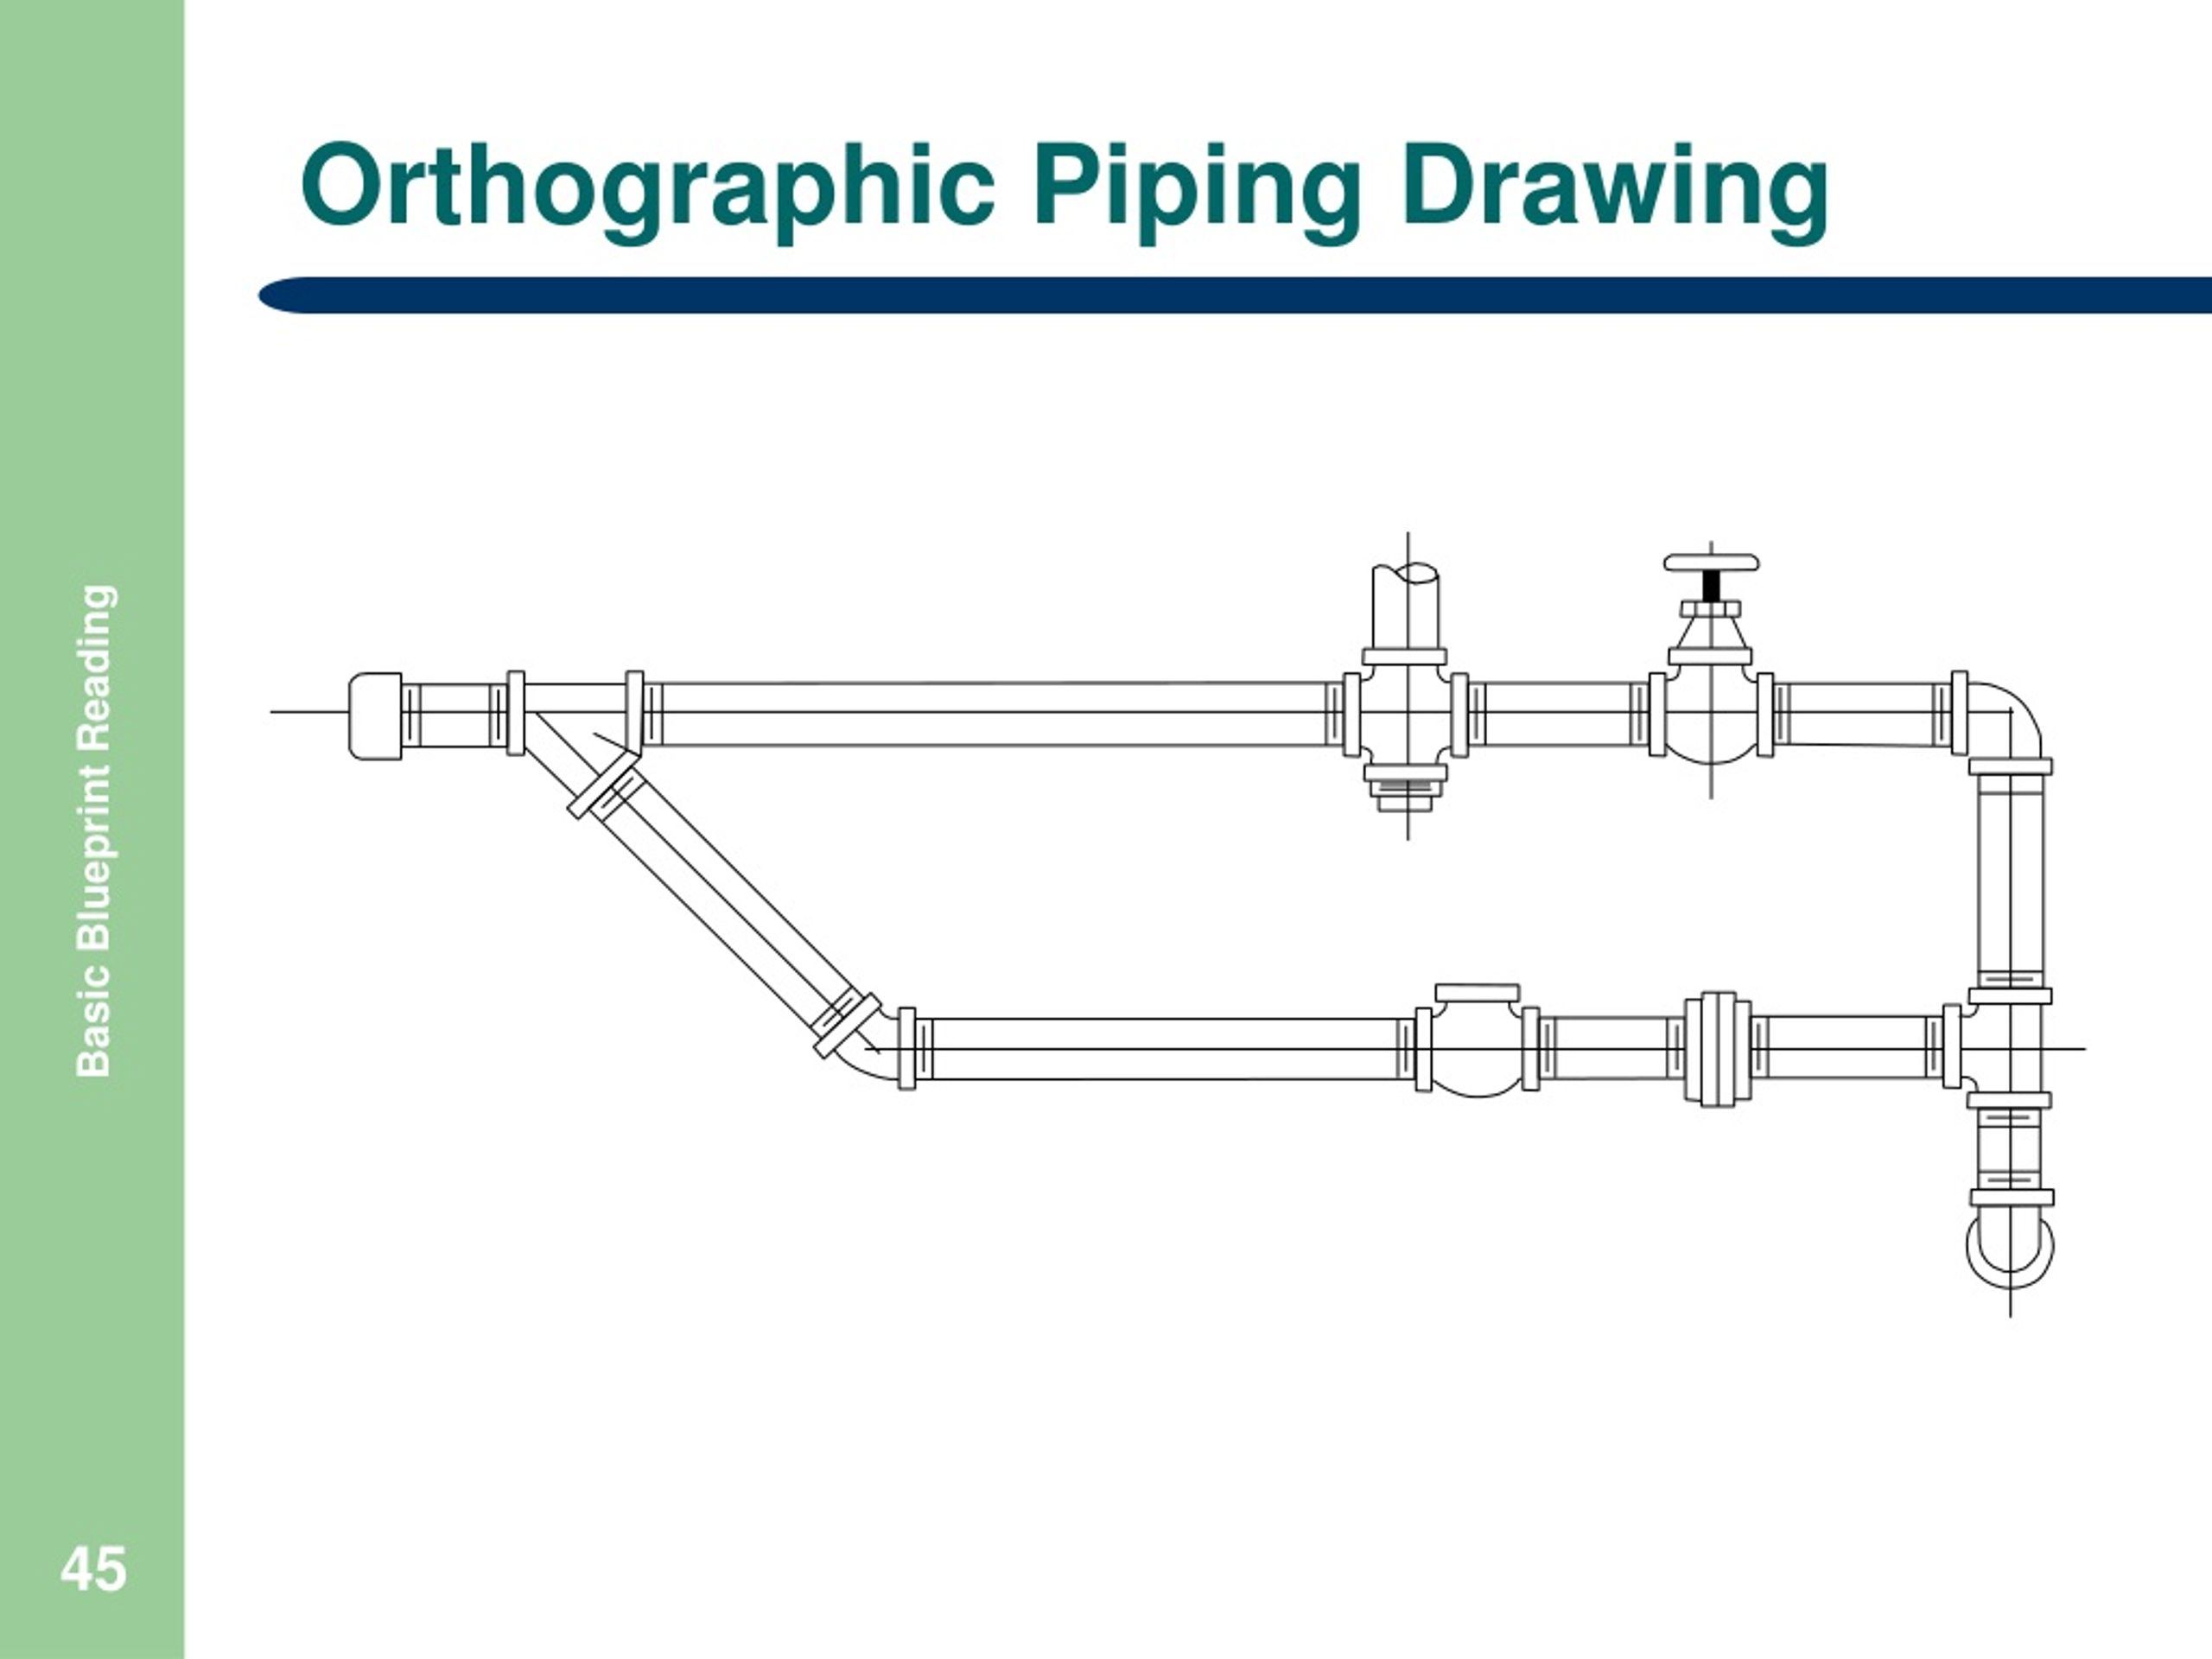 Piping orthographic drawing symbols kloology